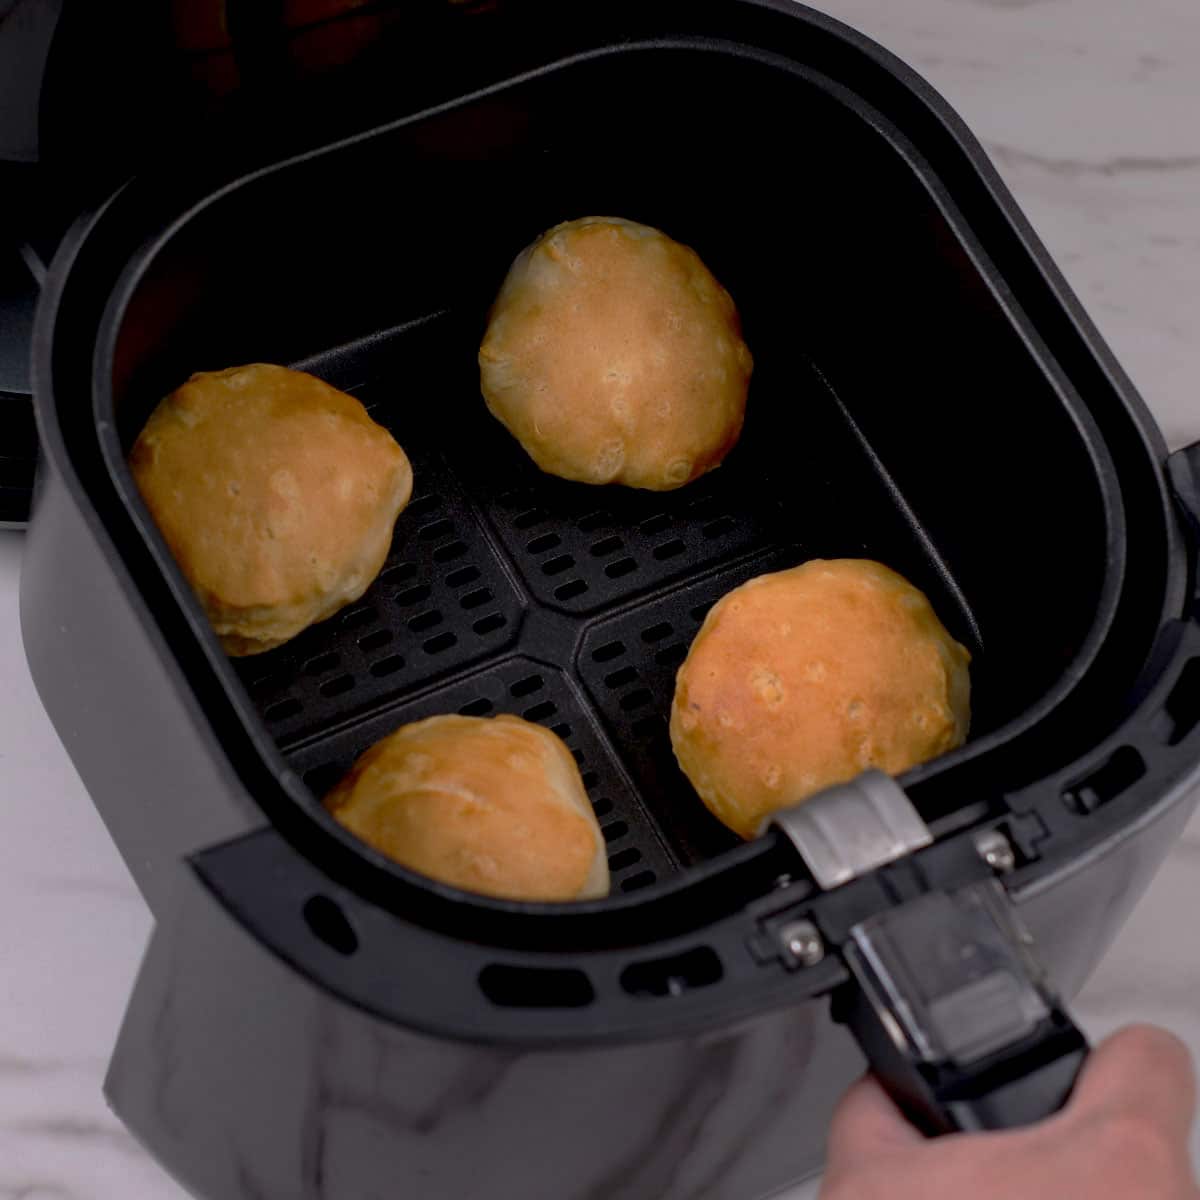 Cooking Pillsbury country biscuits in air fryer